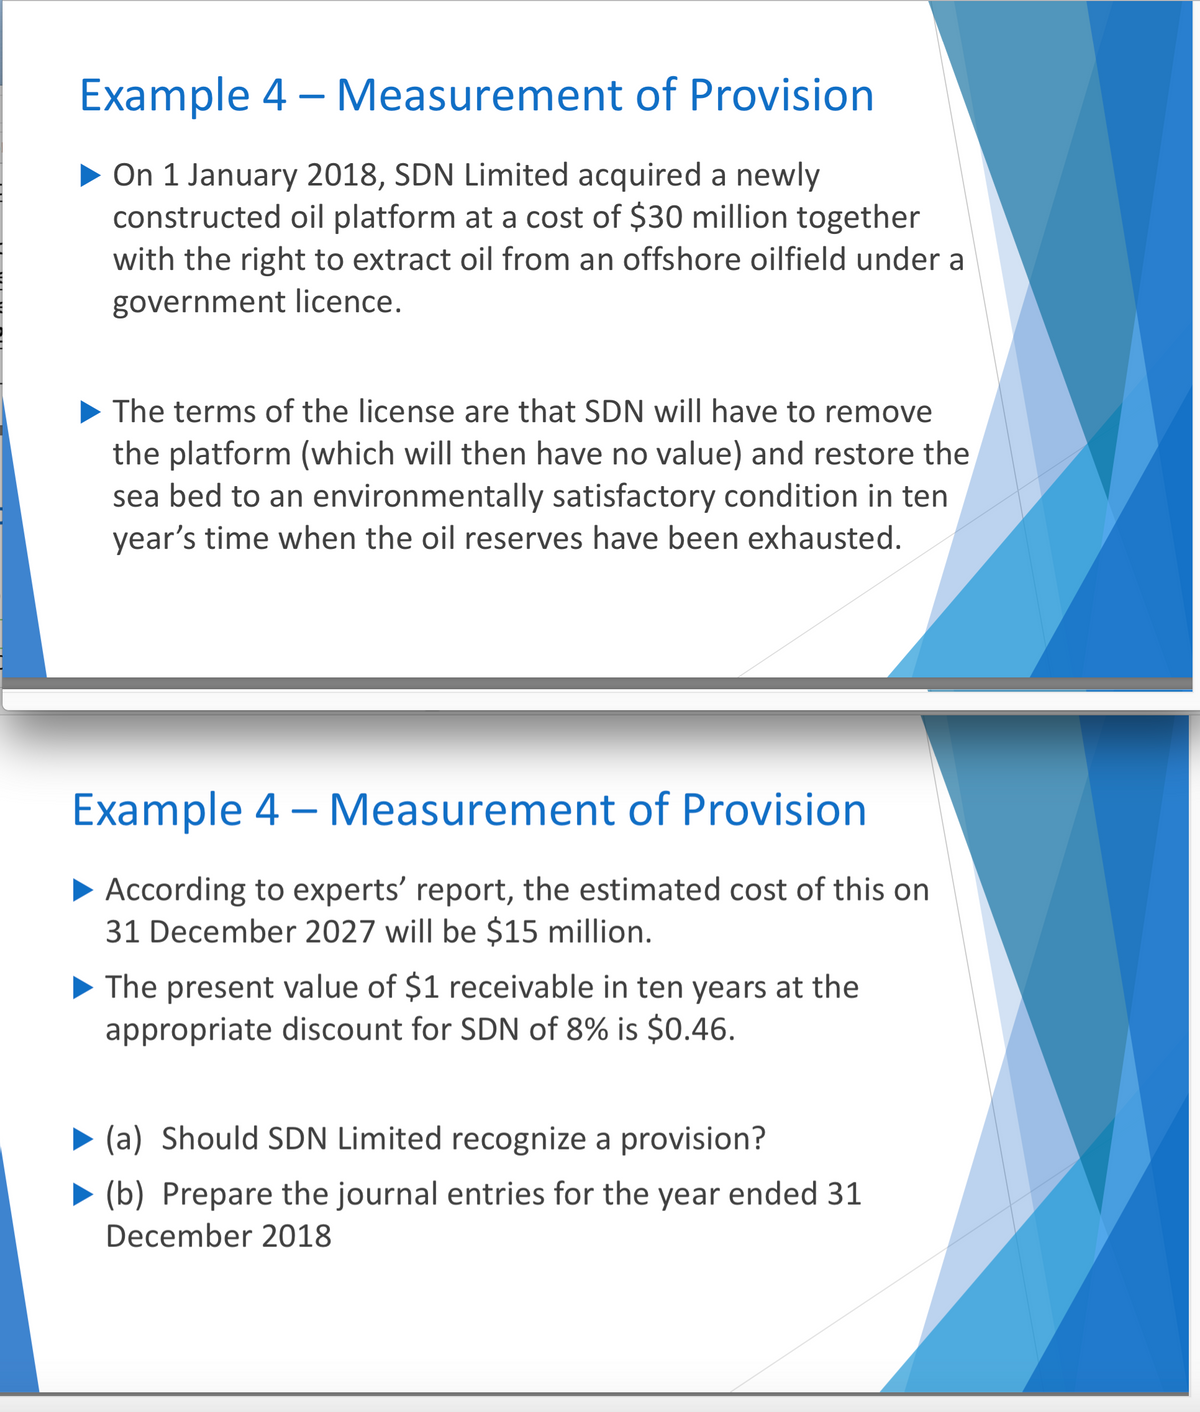 Example 4 - Measurement of Provision
▶ On 1 January 2018, SDN Limited acquired a newly
constructed oil platform at a cost of $30 million together
with the right to extract oil from an offshore oilfield under a
government licence.
▶ The terms of the license are that SDN will have to remove
the platform (which will then have no value) and restore the
sea bed to an environmentally satisfactory condition in ten
year's time when the oil reserves have been exhausted.
Example 4 - Measurement of Provision
► According to experts' report, the estimated cost of this on
31 December 2027 will be $15 million.
The present value of $1 receivable in ten years at the
appropriate discount for SDN of 8% is $0.46.
(a) Should SDN Limited recognize a provision?
(b) Prepare the journal entries for the year ended 31
December 2018